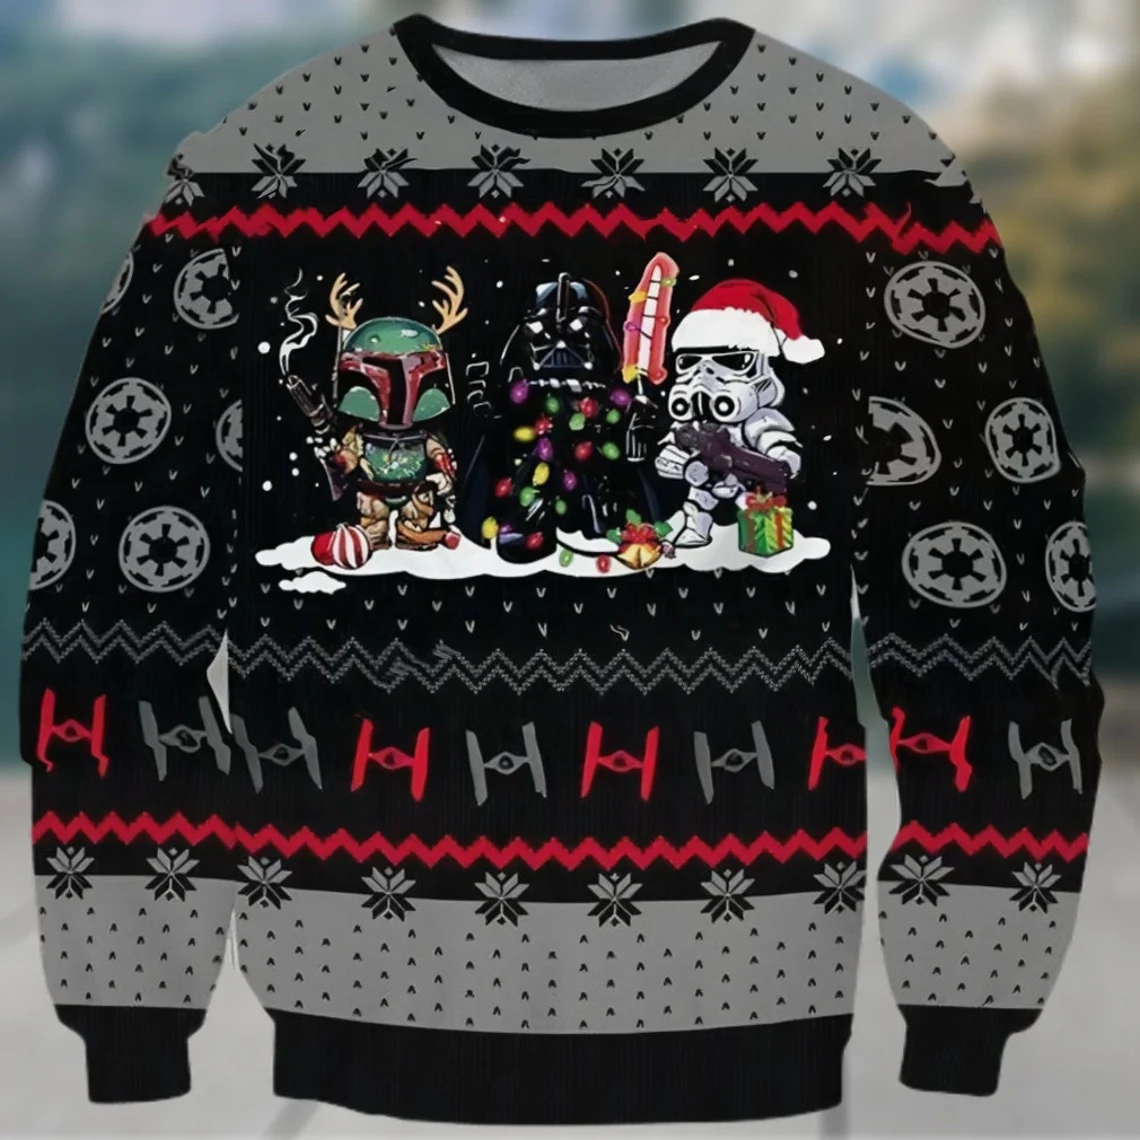 Darth Vader Ugly Knitted Christmas Sweater